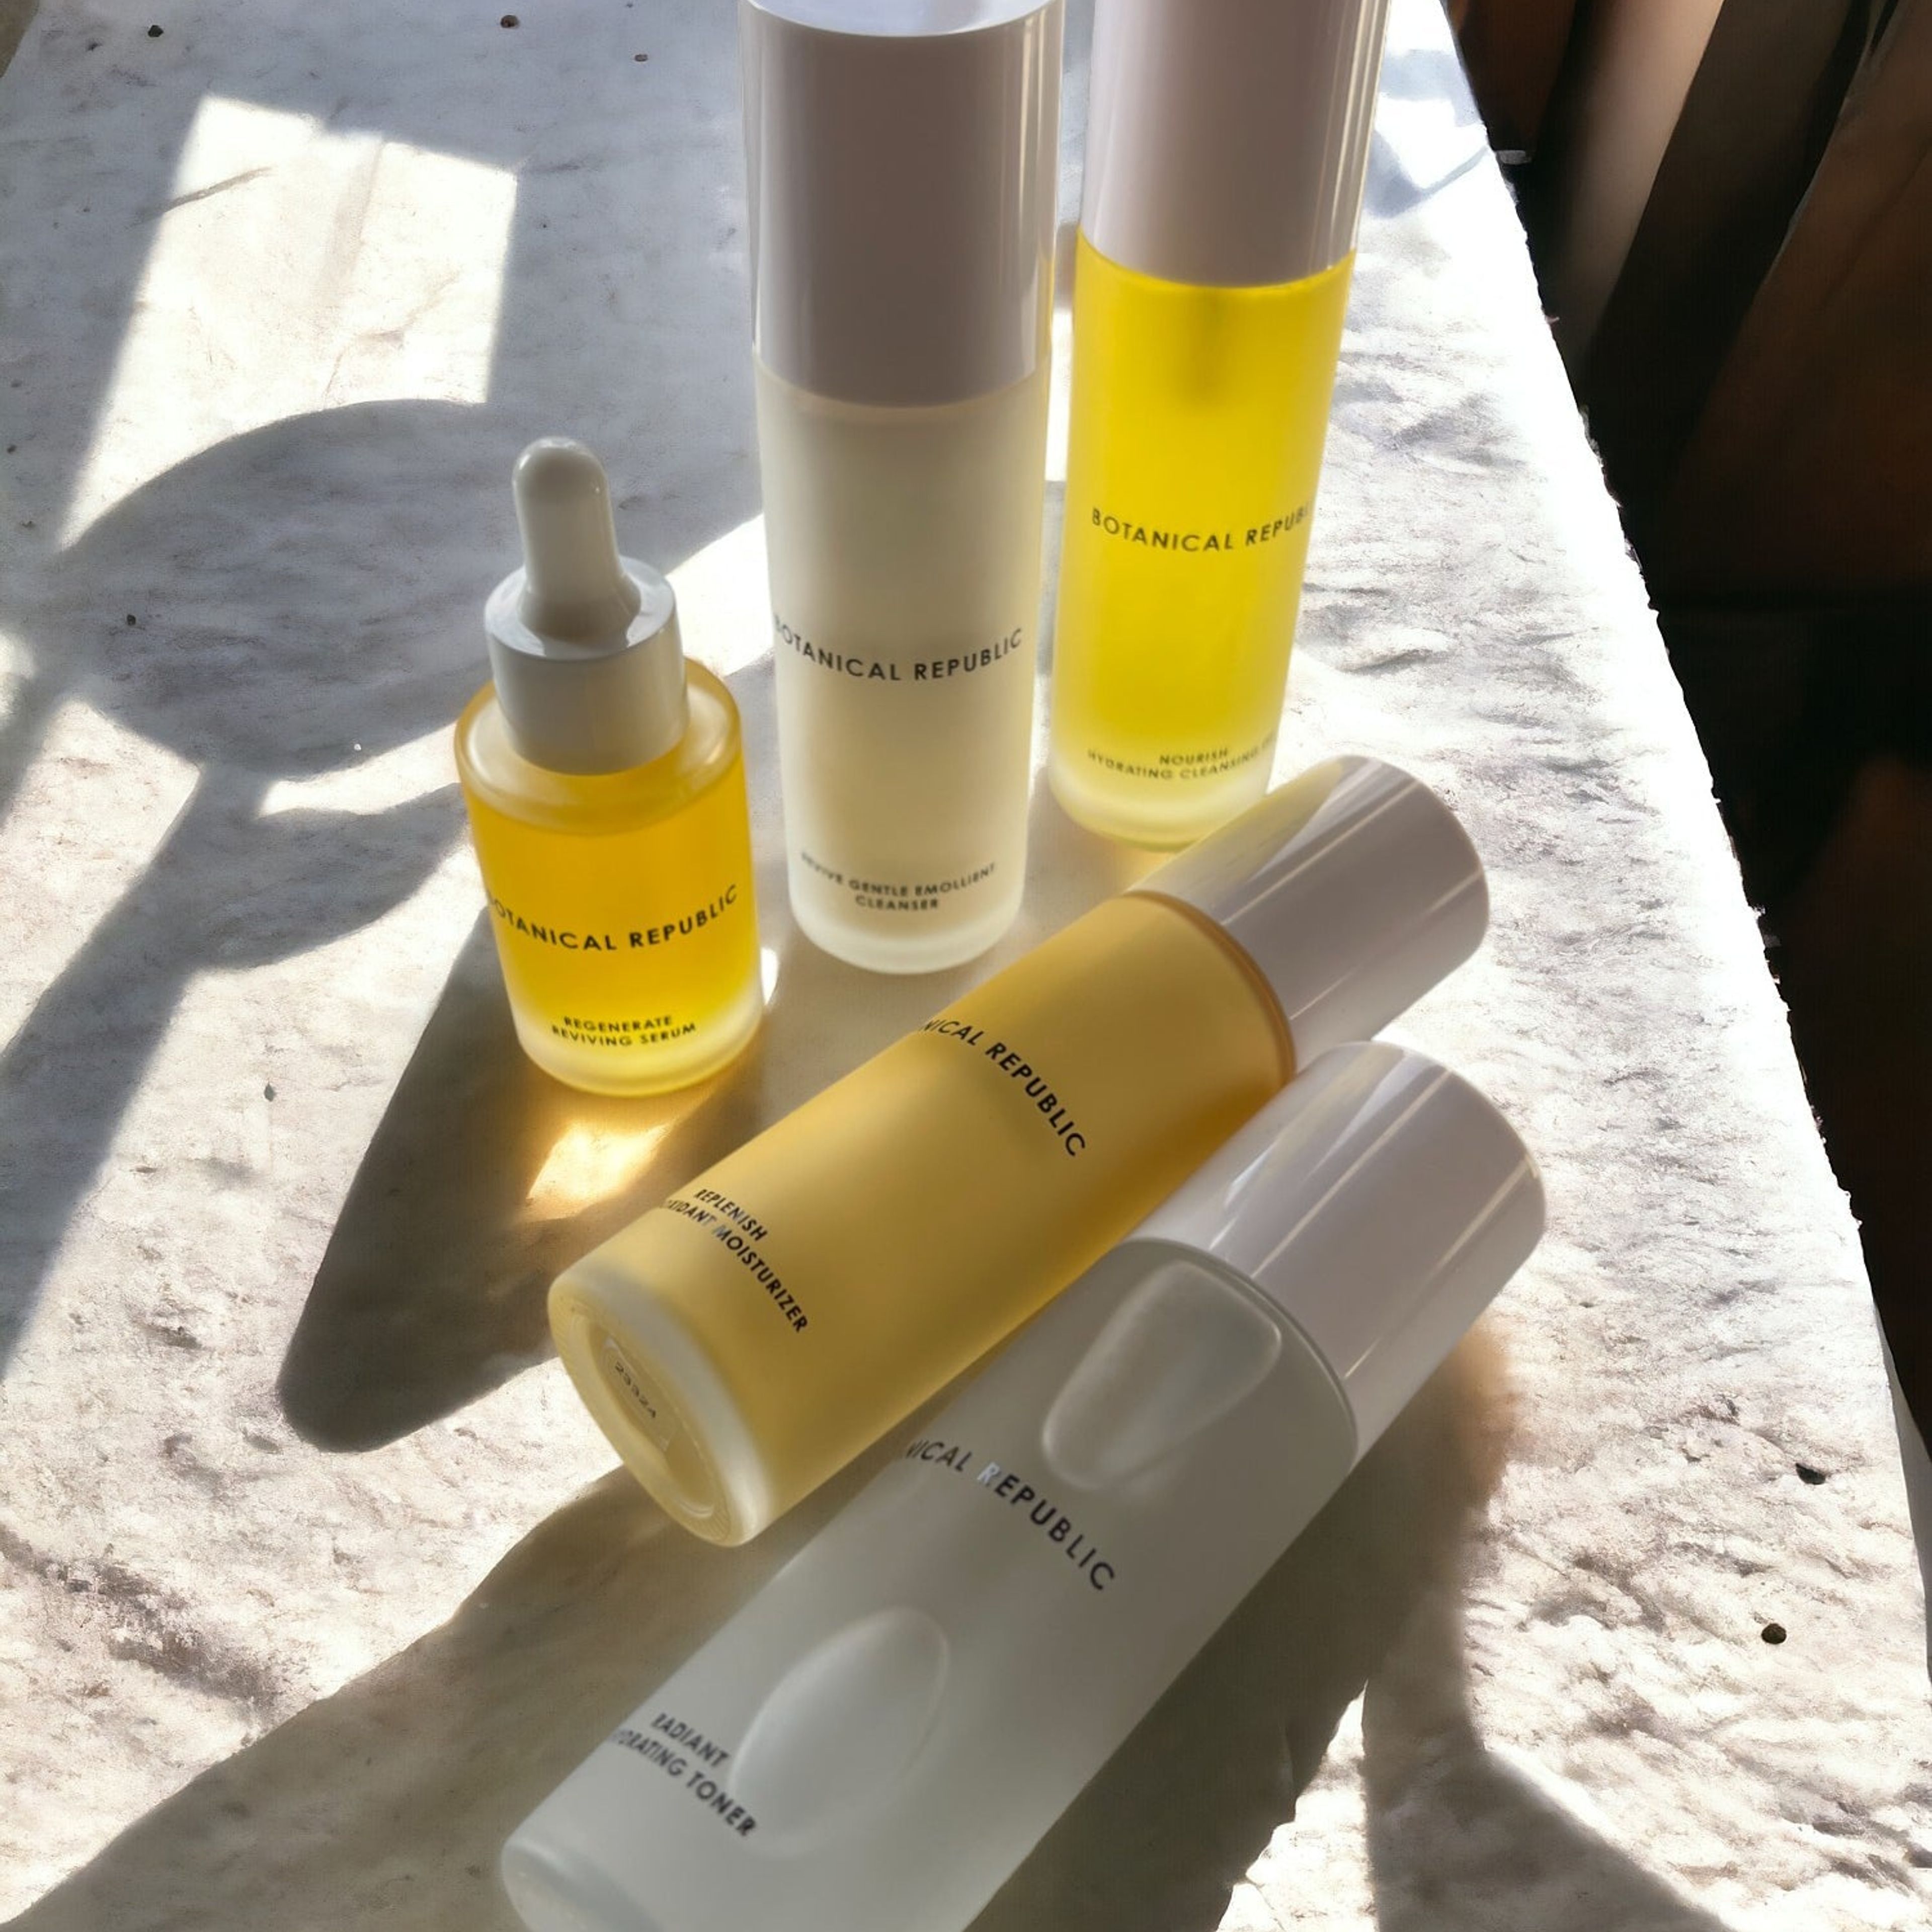 The Essentials Kit for Dry Skin II